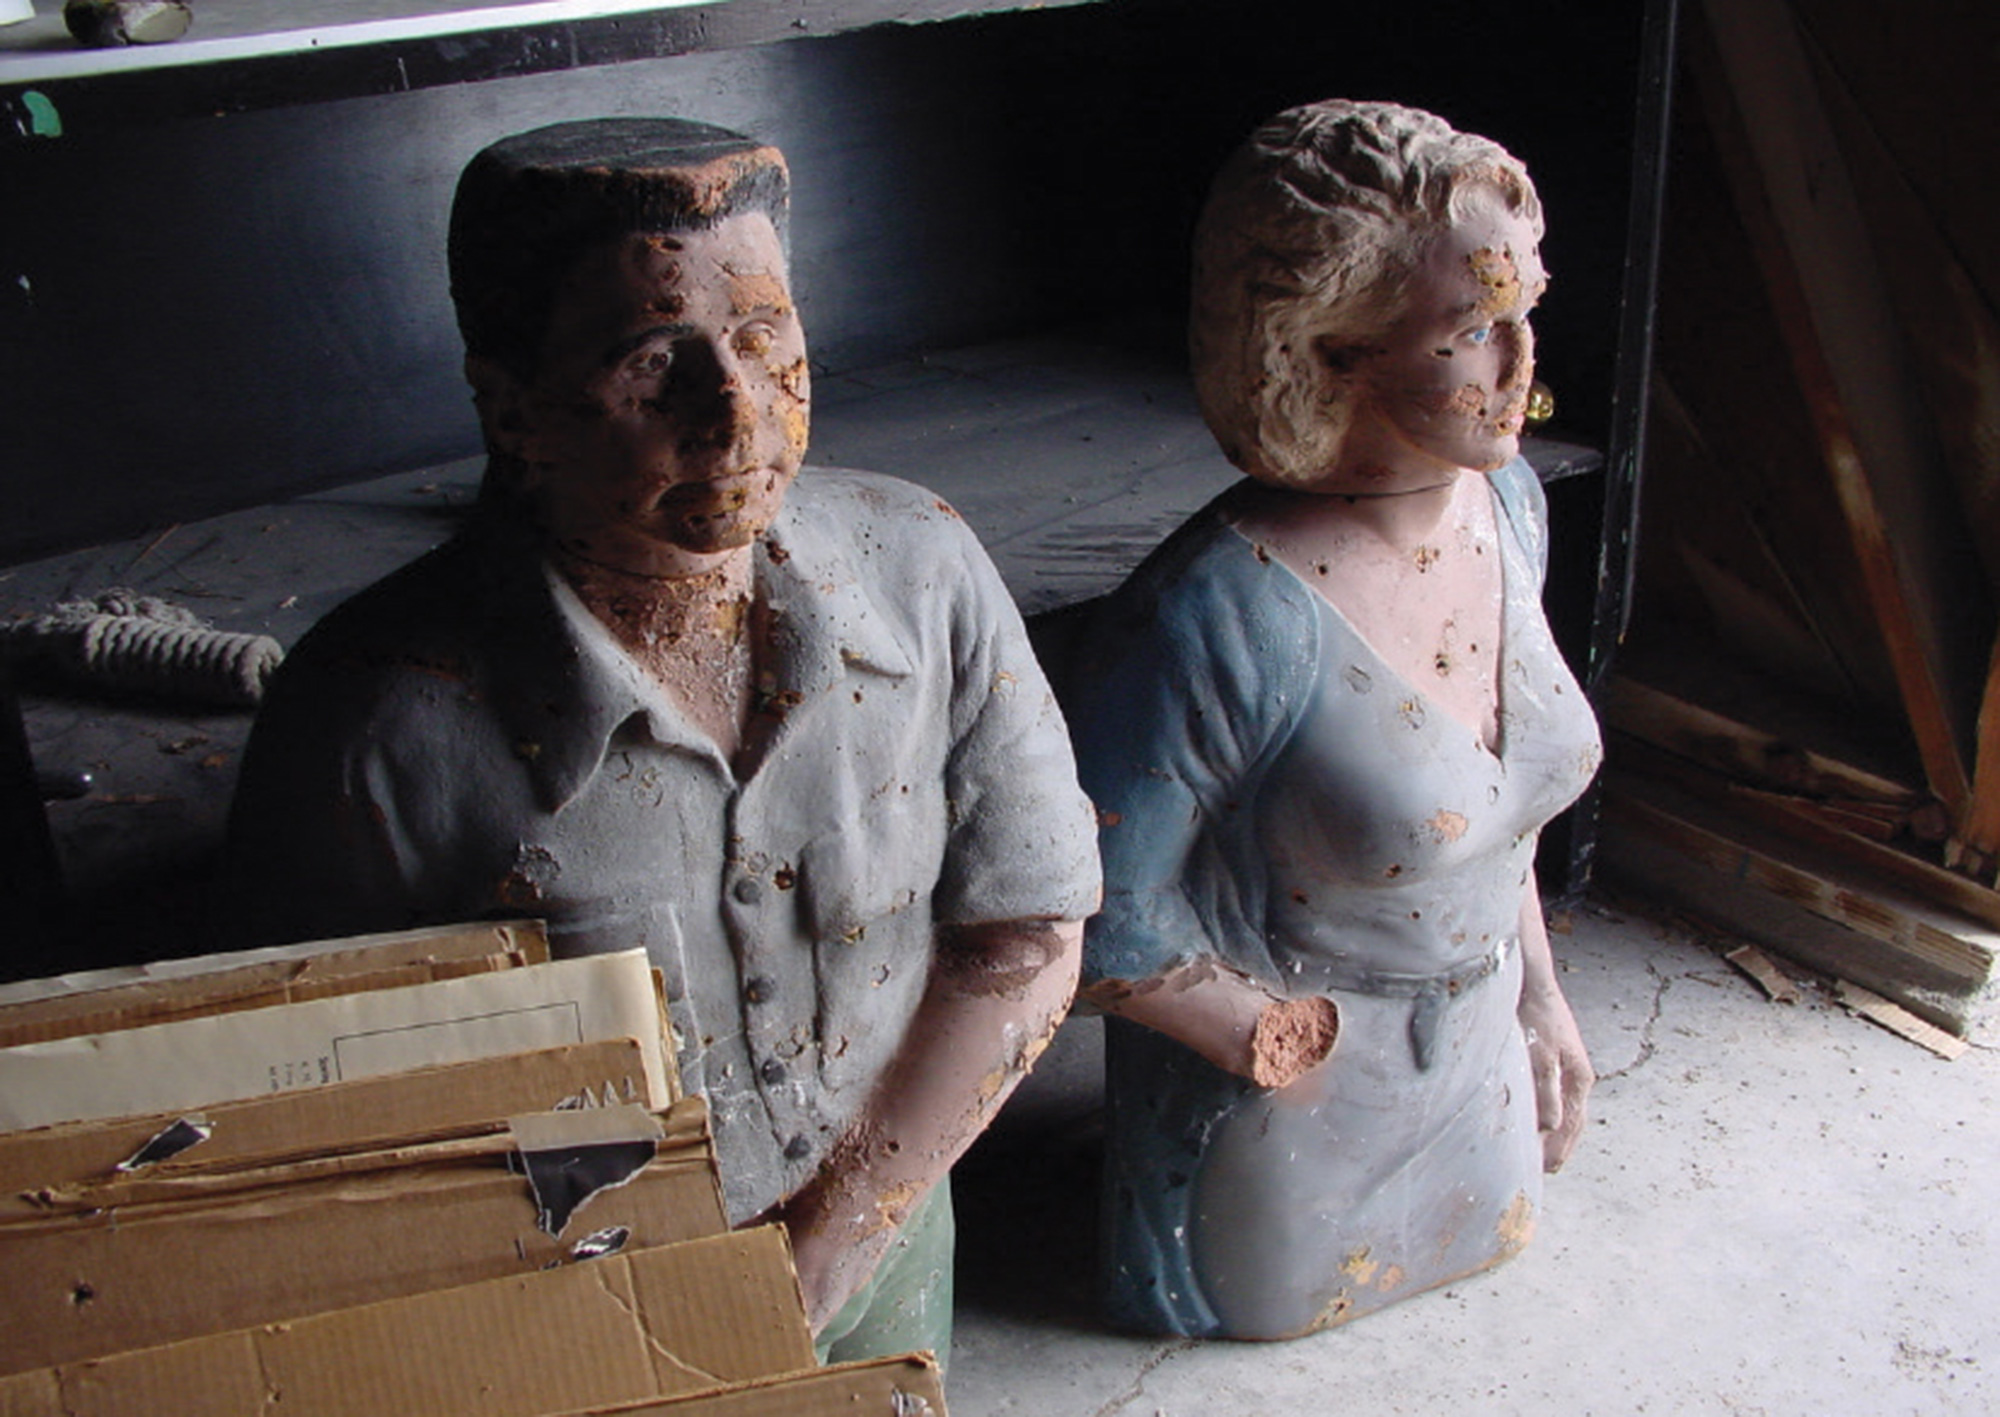 A photograph of two used police training mannequins, one male torso and head next to one female torso and head, both clothed.